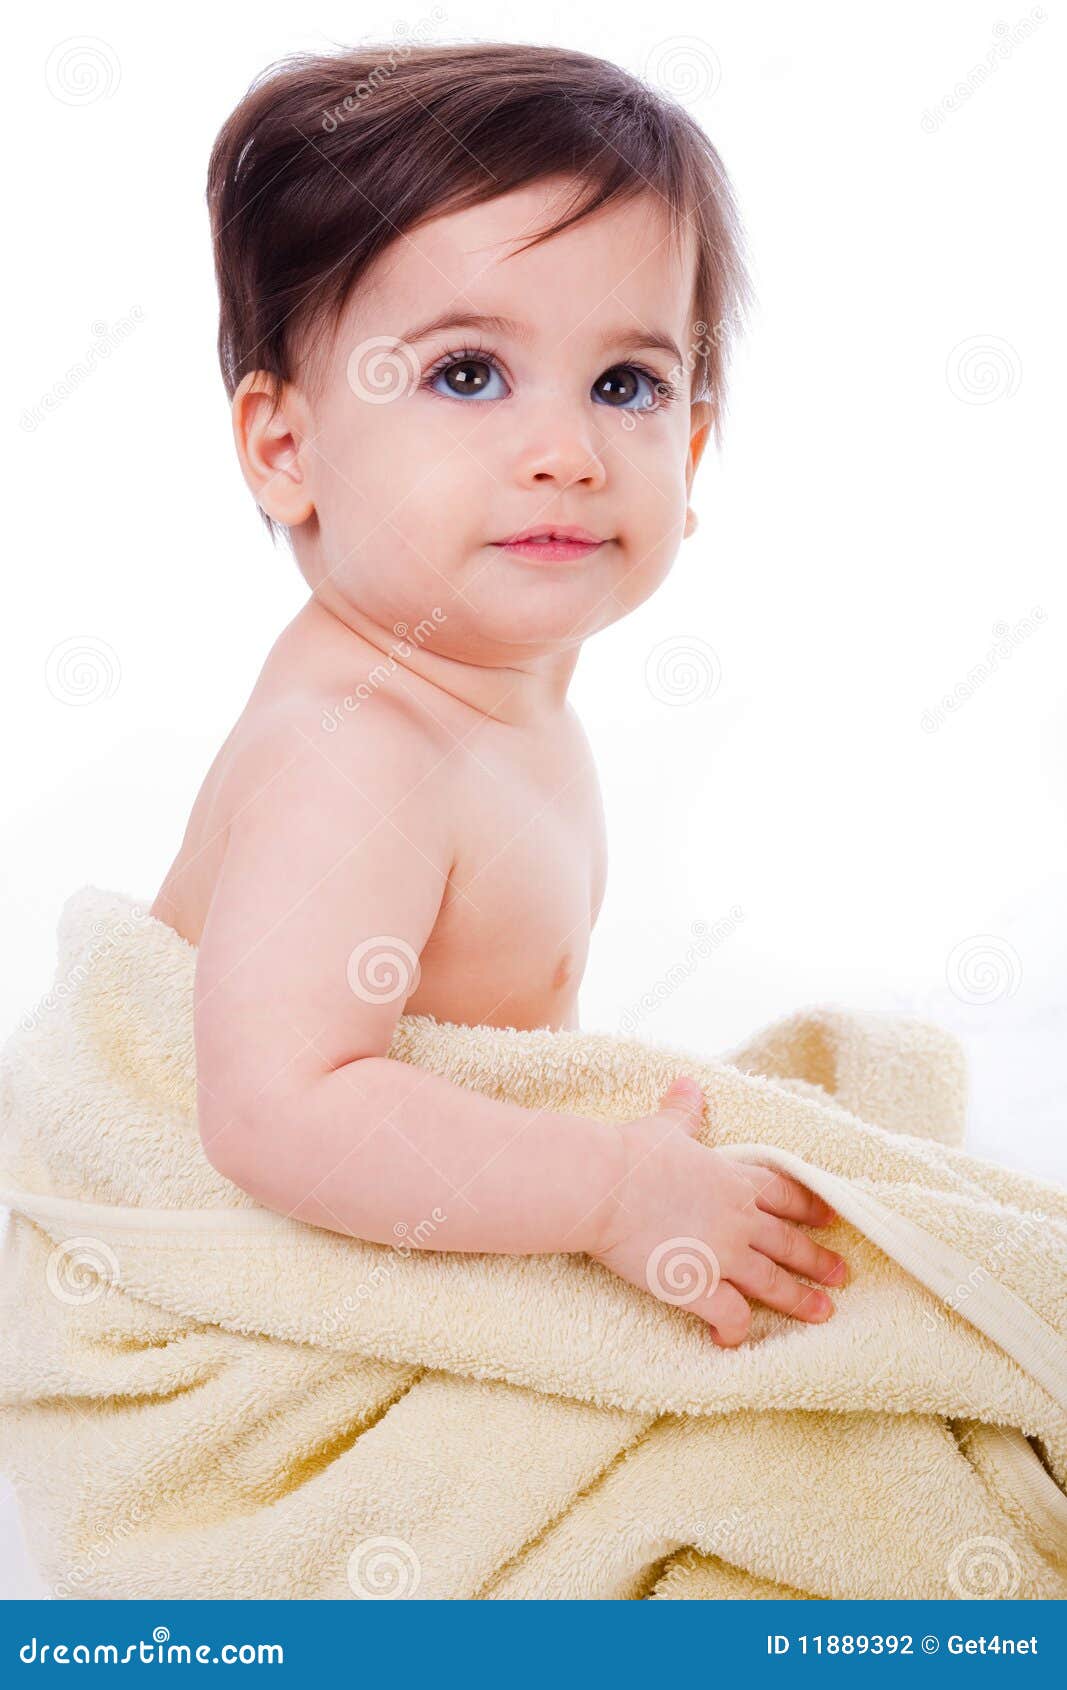 Baby wrapped in bath towel stock photo. Image of blanket - 11889392